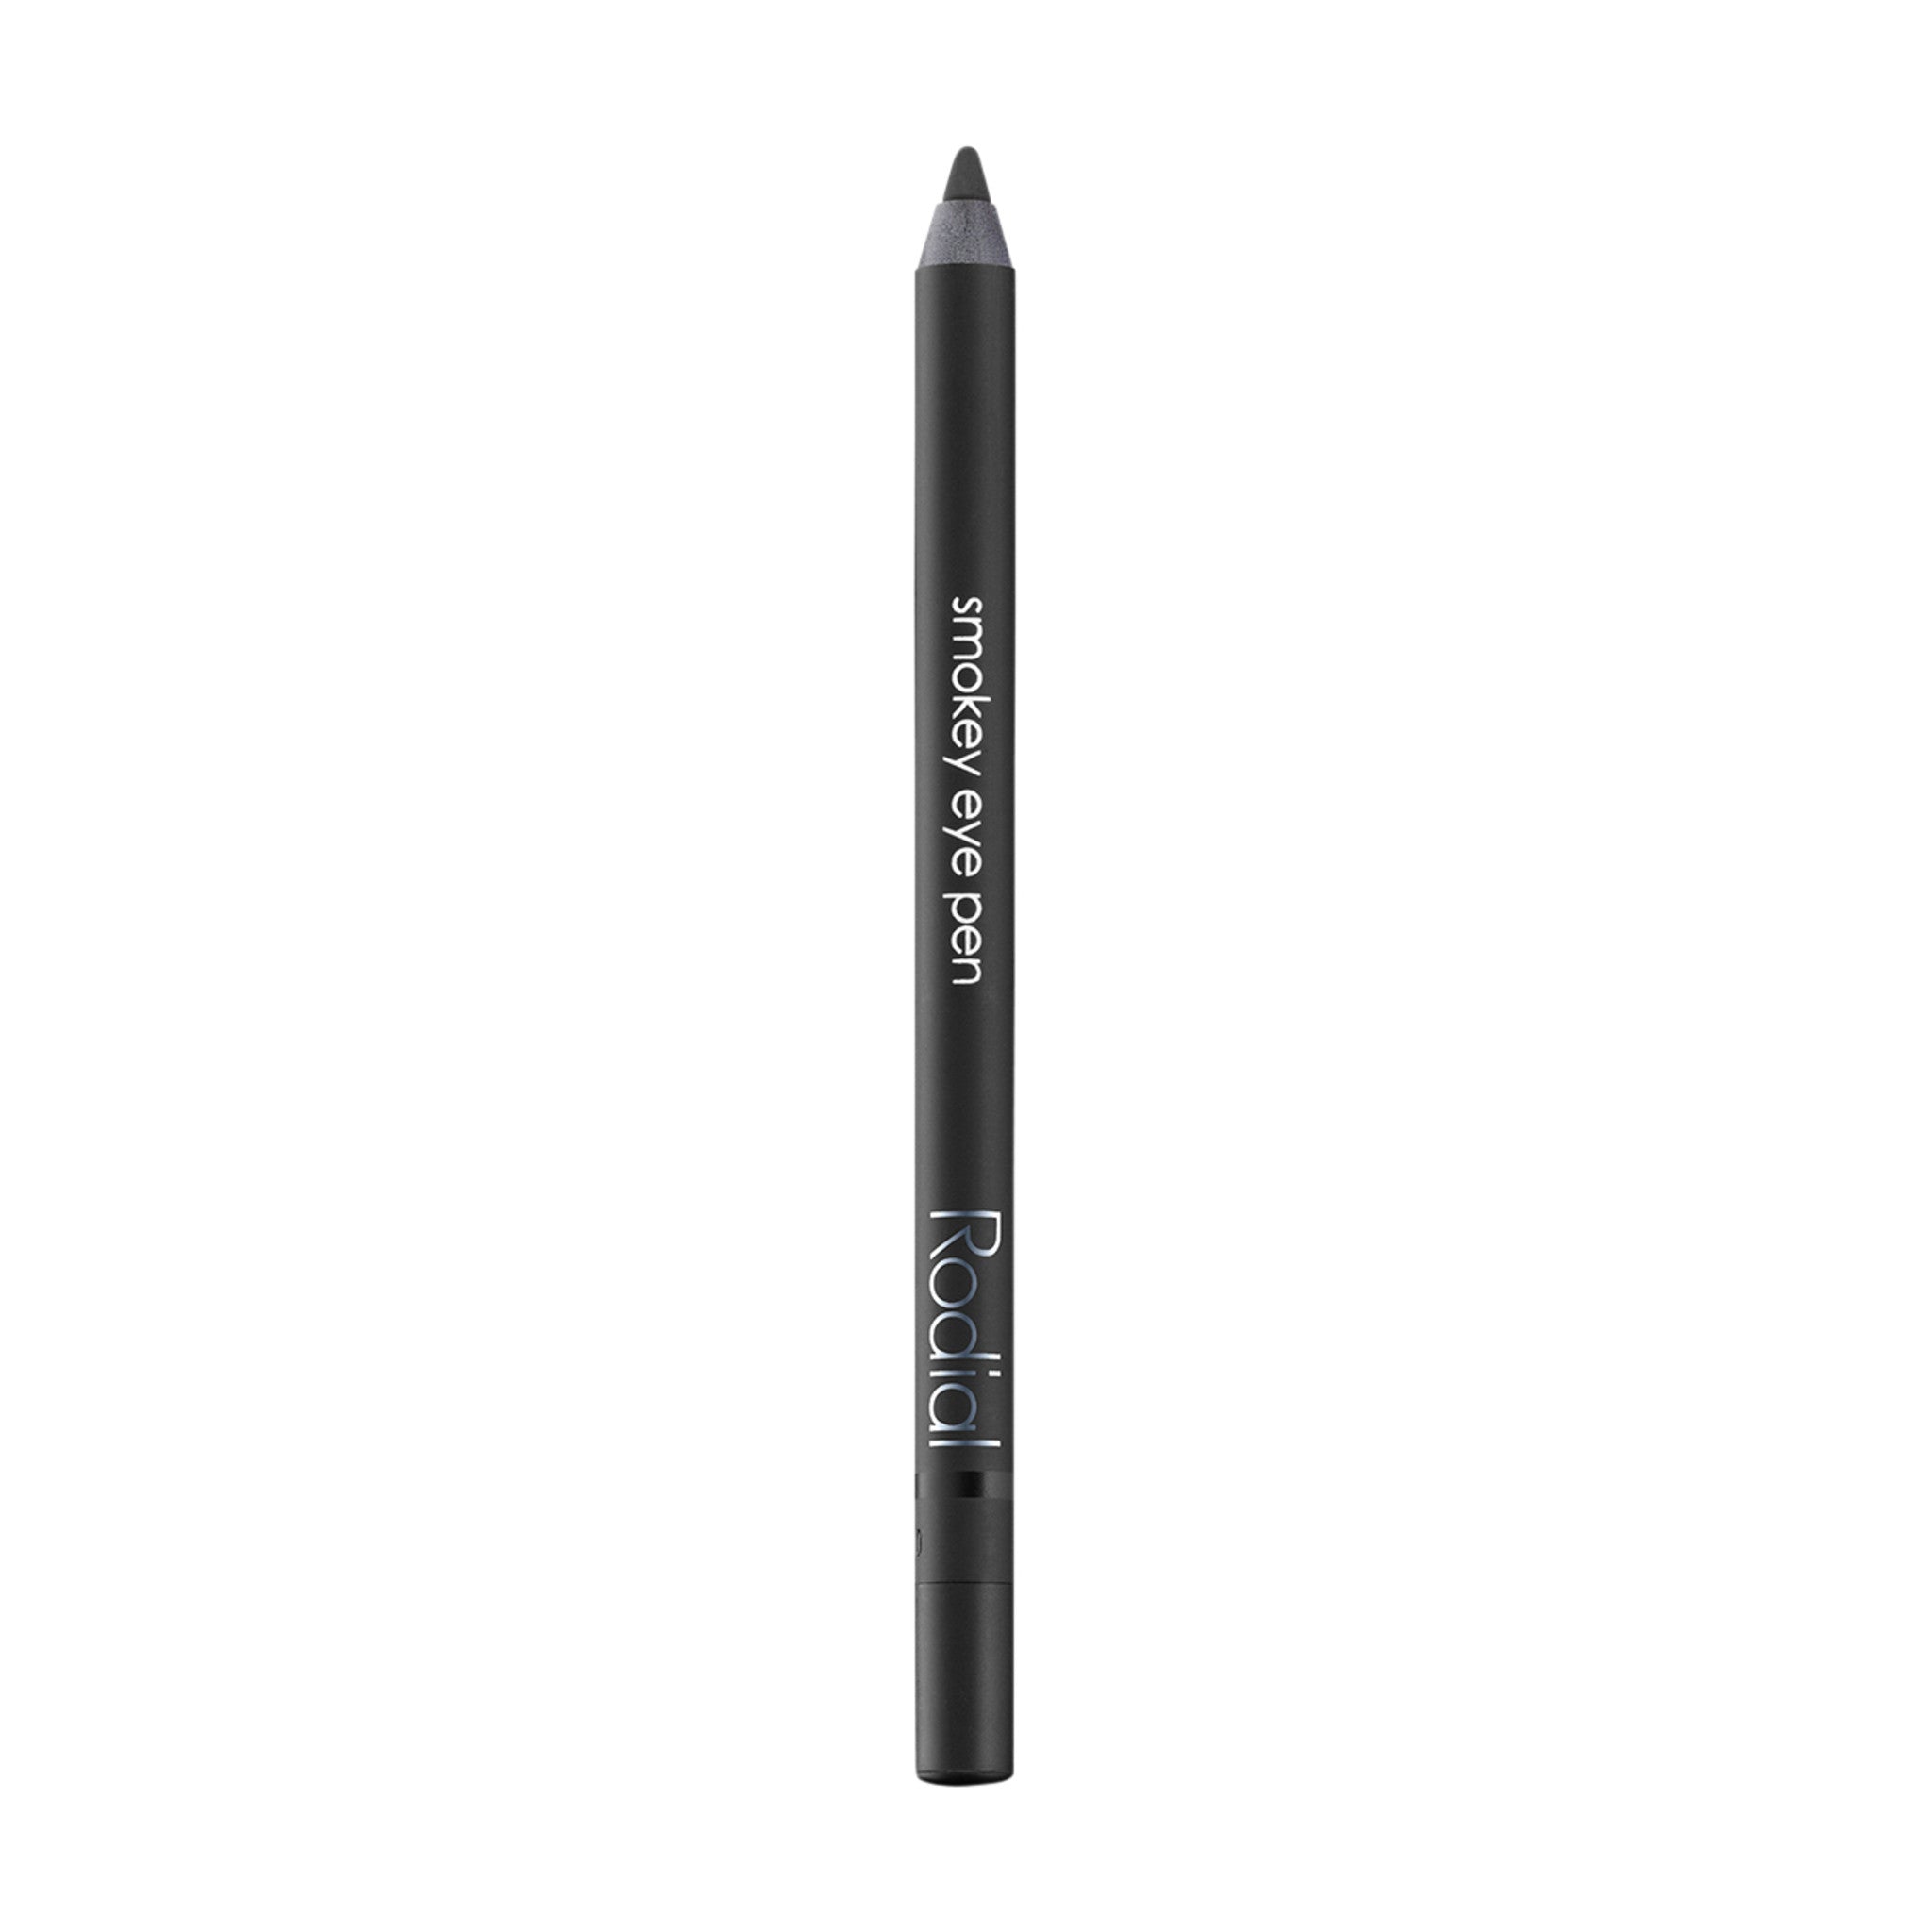 Rodial Smokey Eye Pen Color/Shade variant: Black main image. This product is in the color black